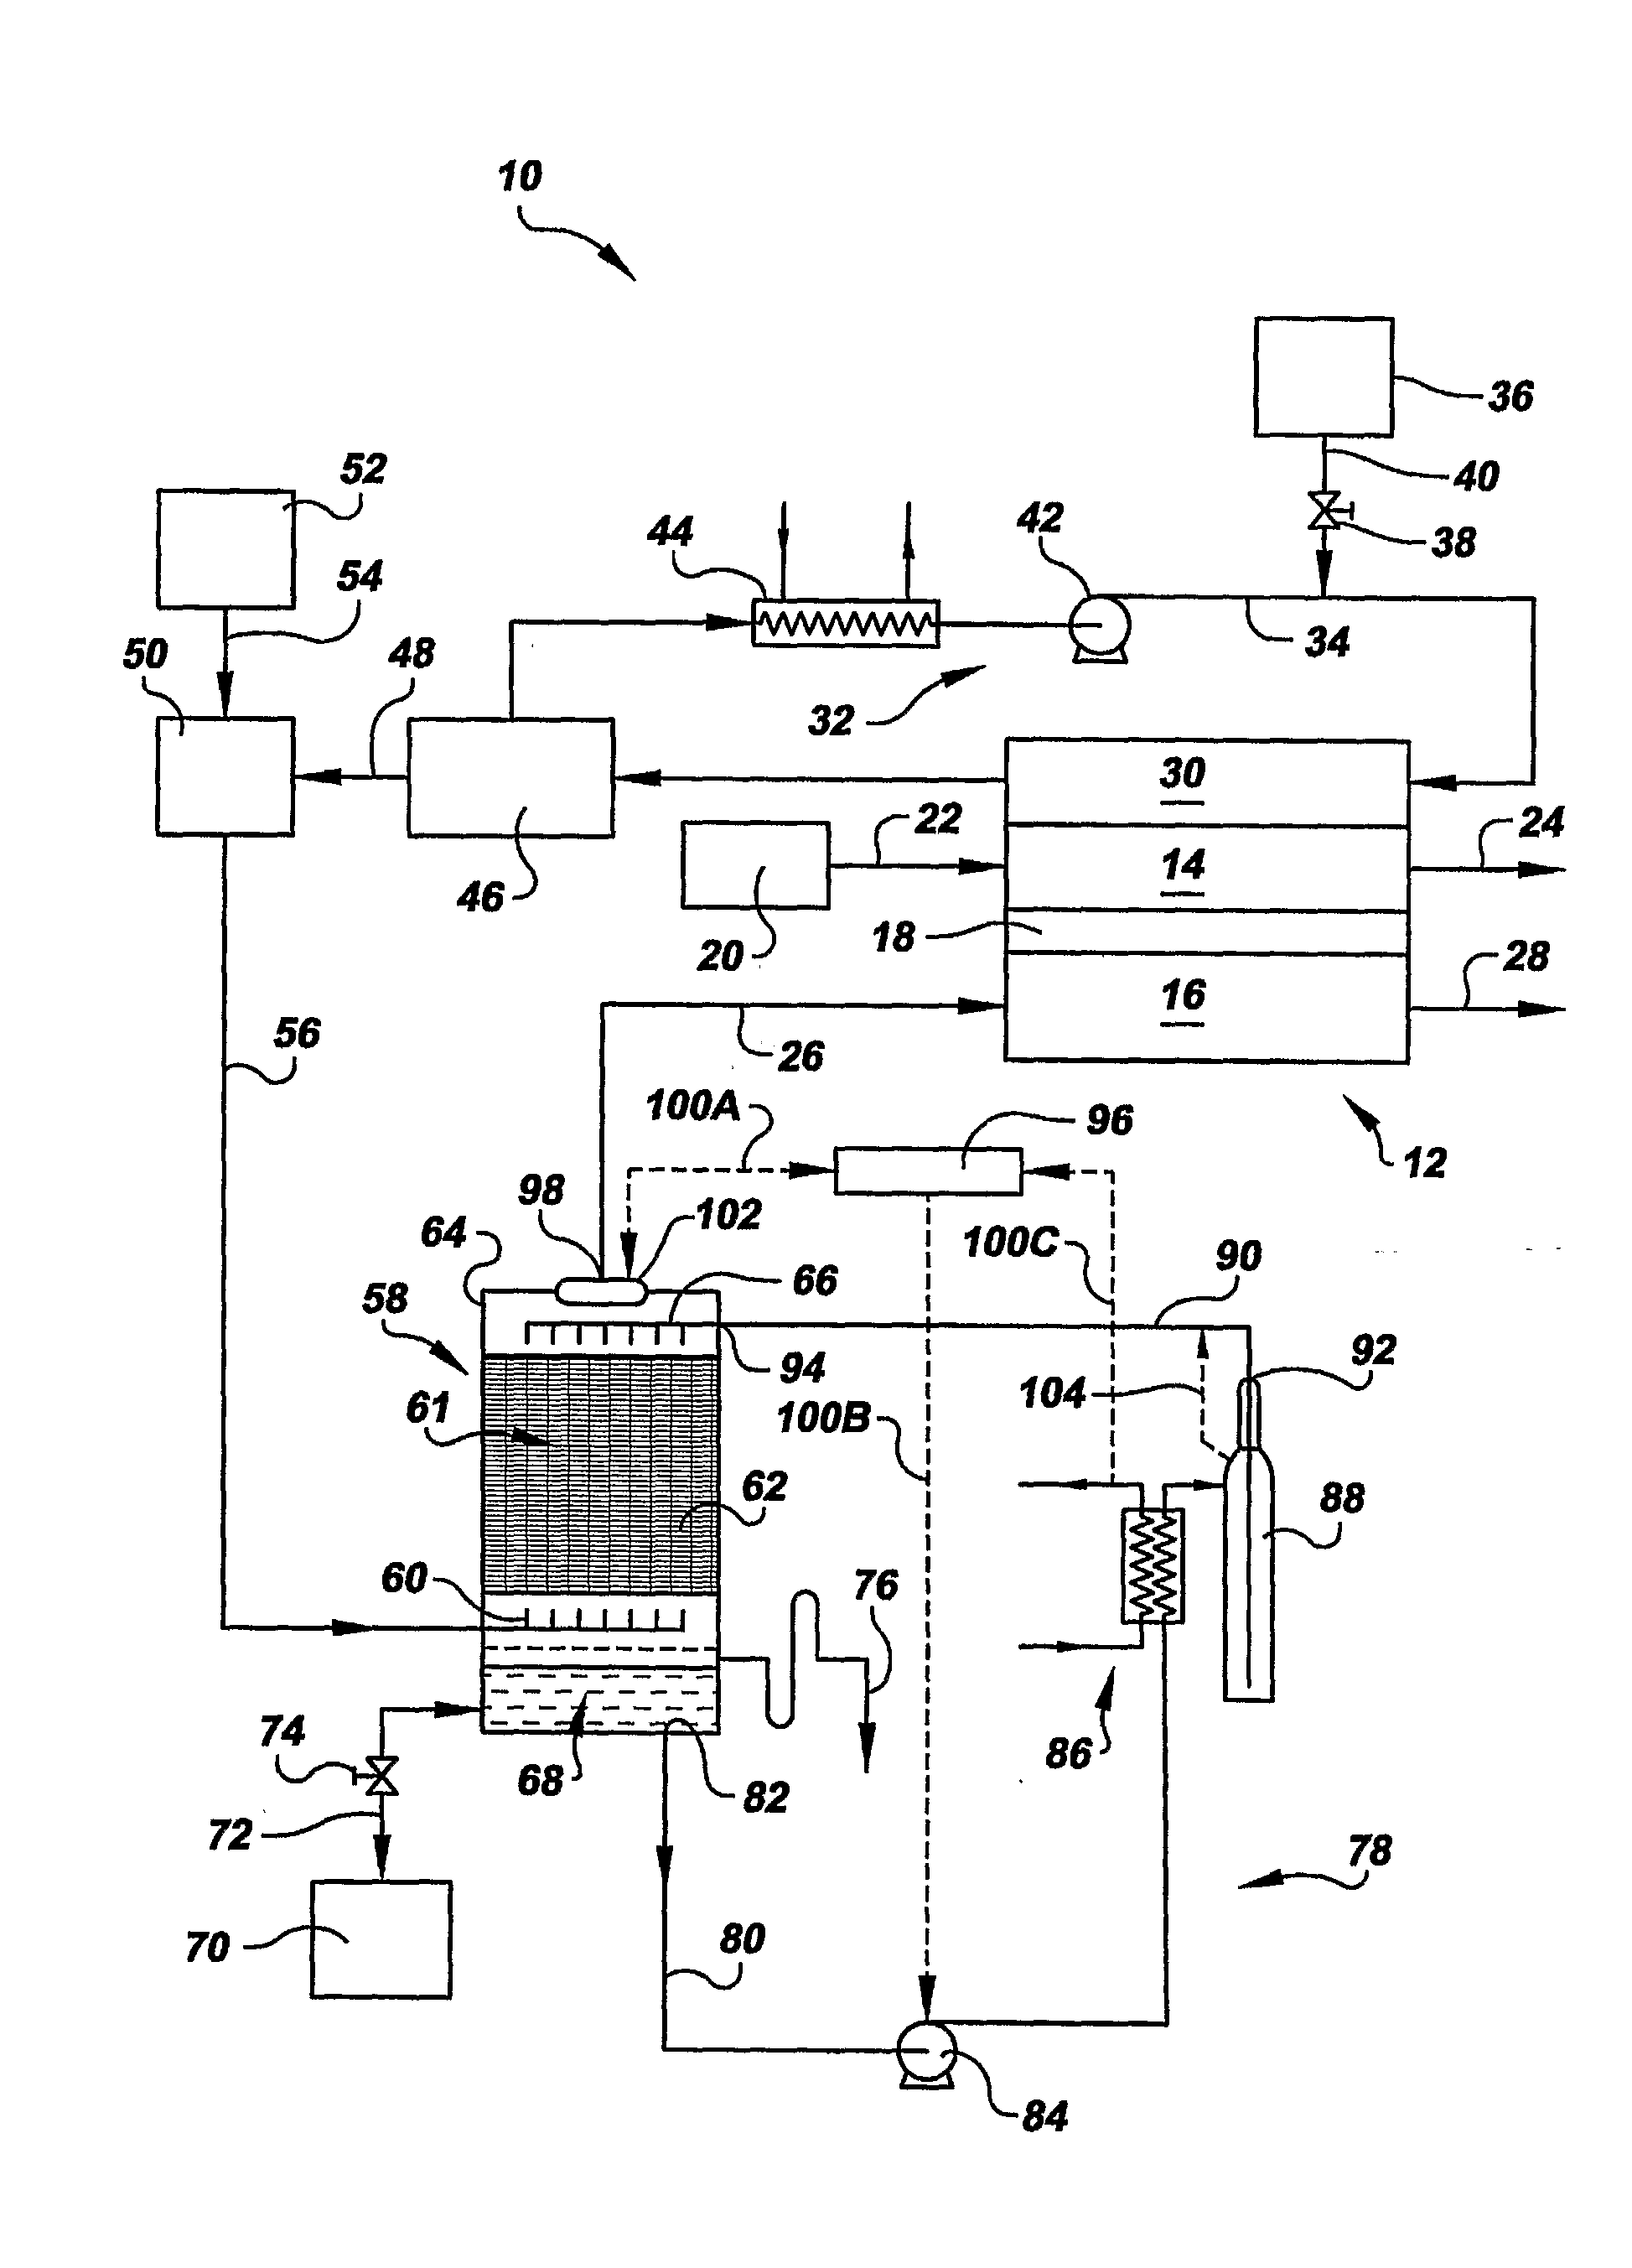 Contaminant separator and isolation loop for a fuel reactant stream for a fuel cell